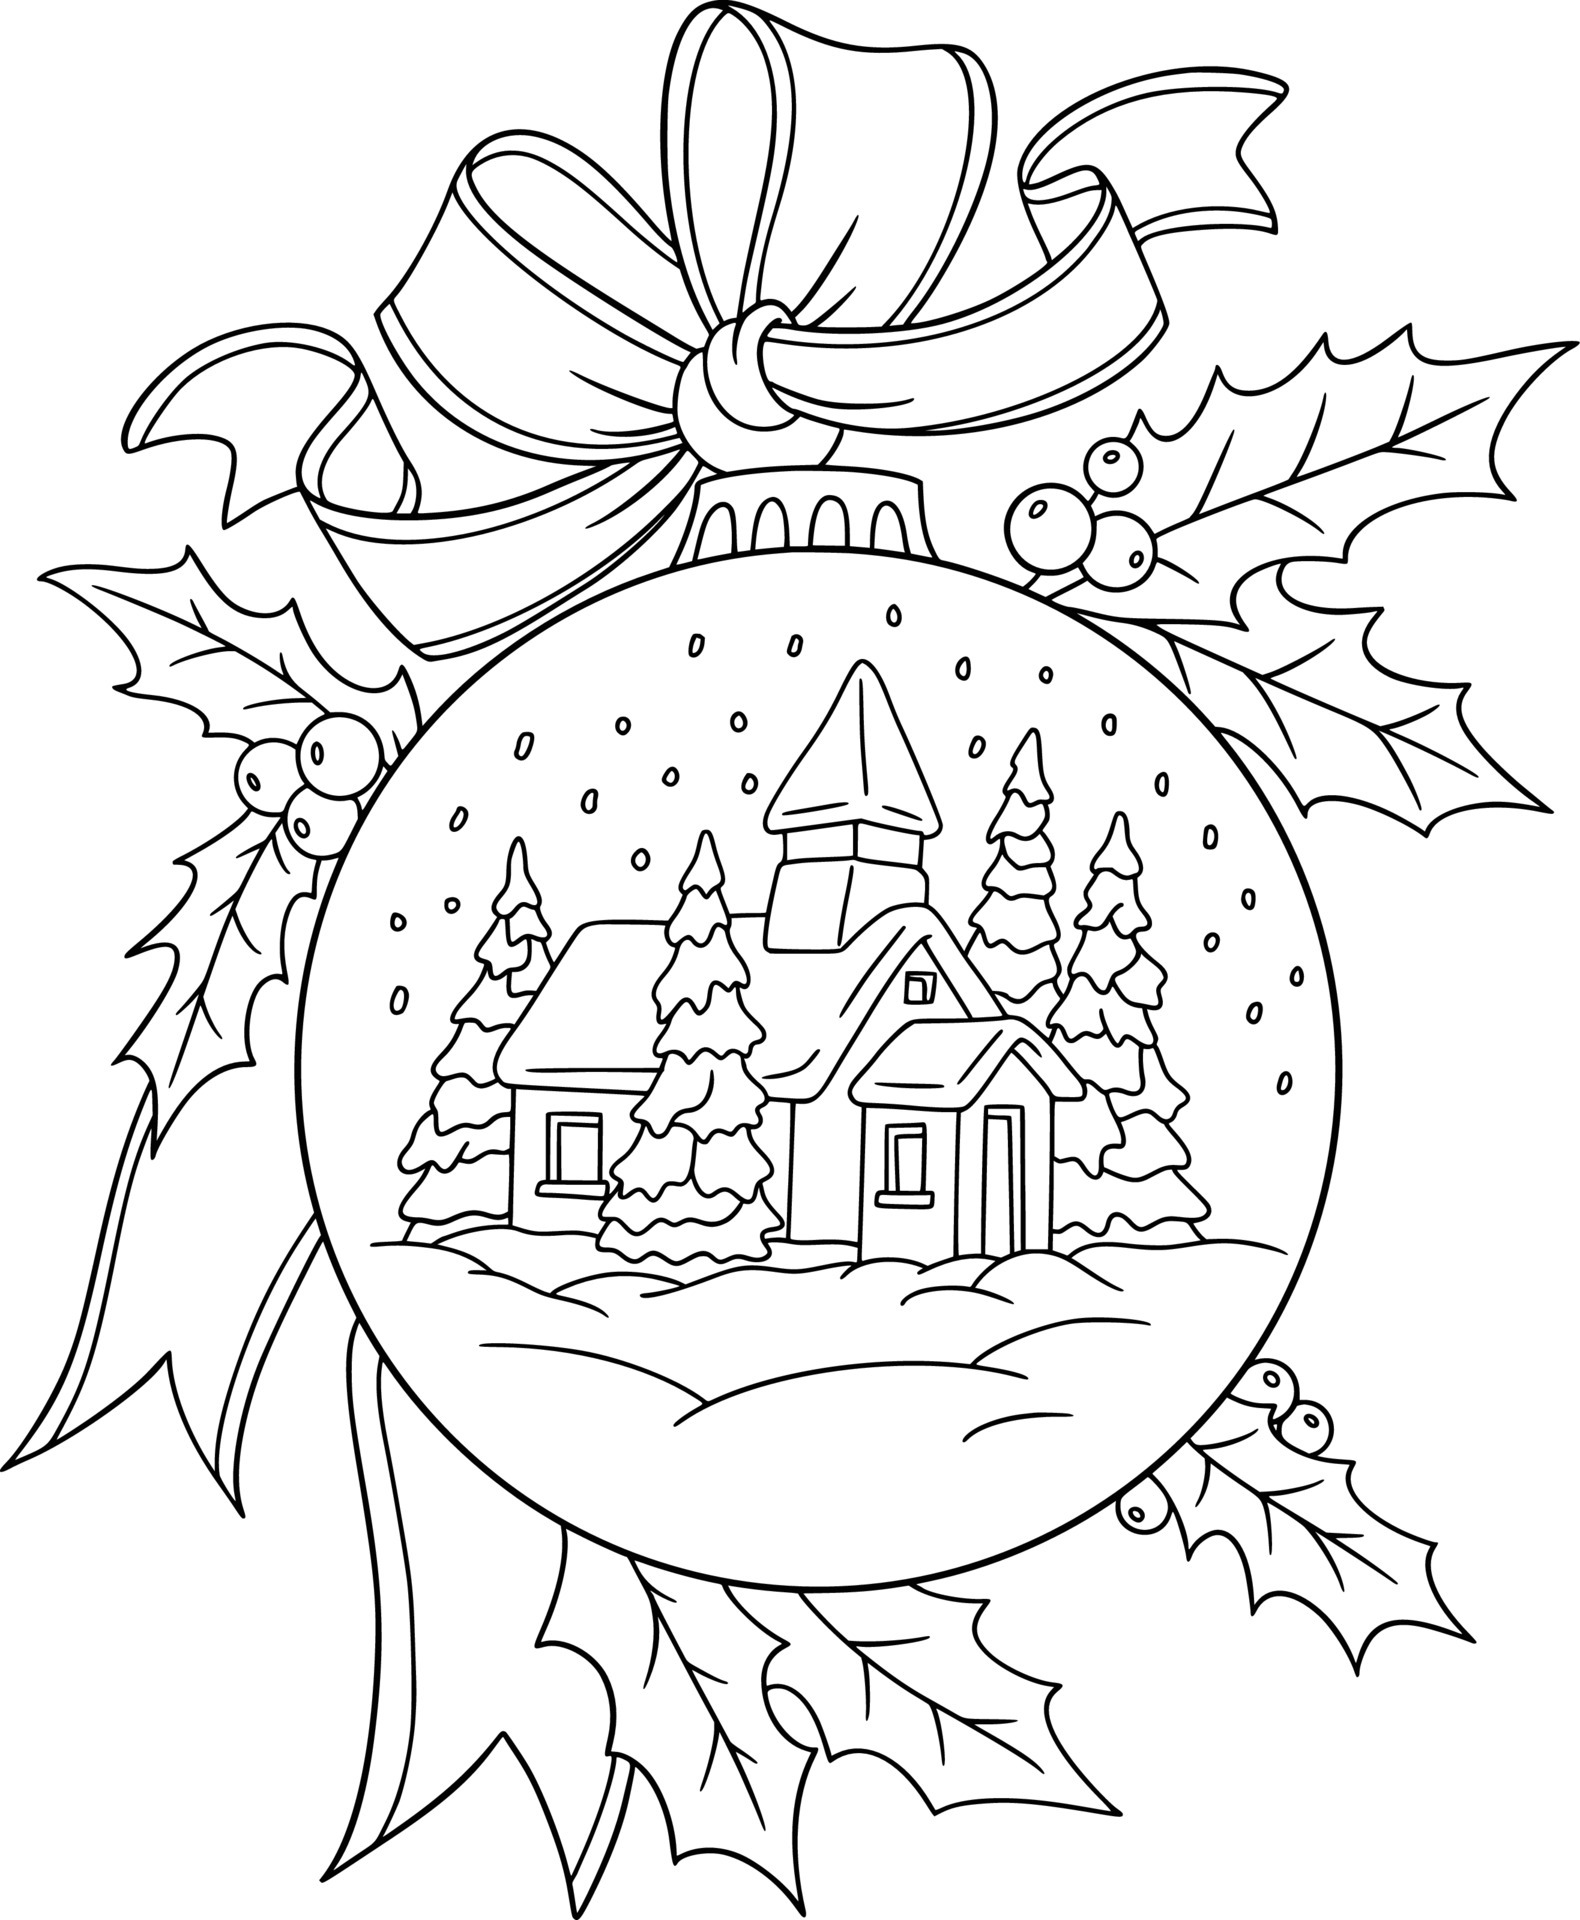 snowballs-coloring-pages-coloring-home